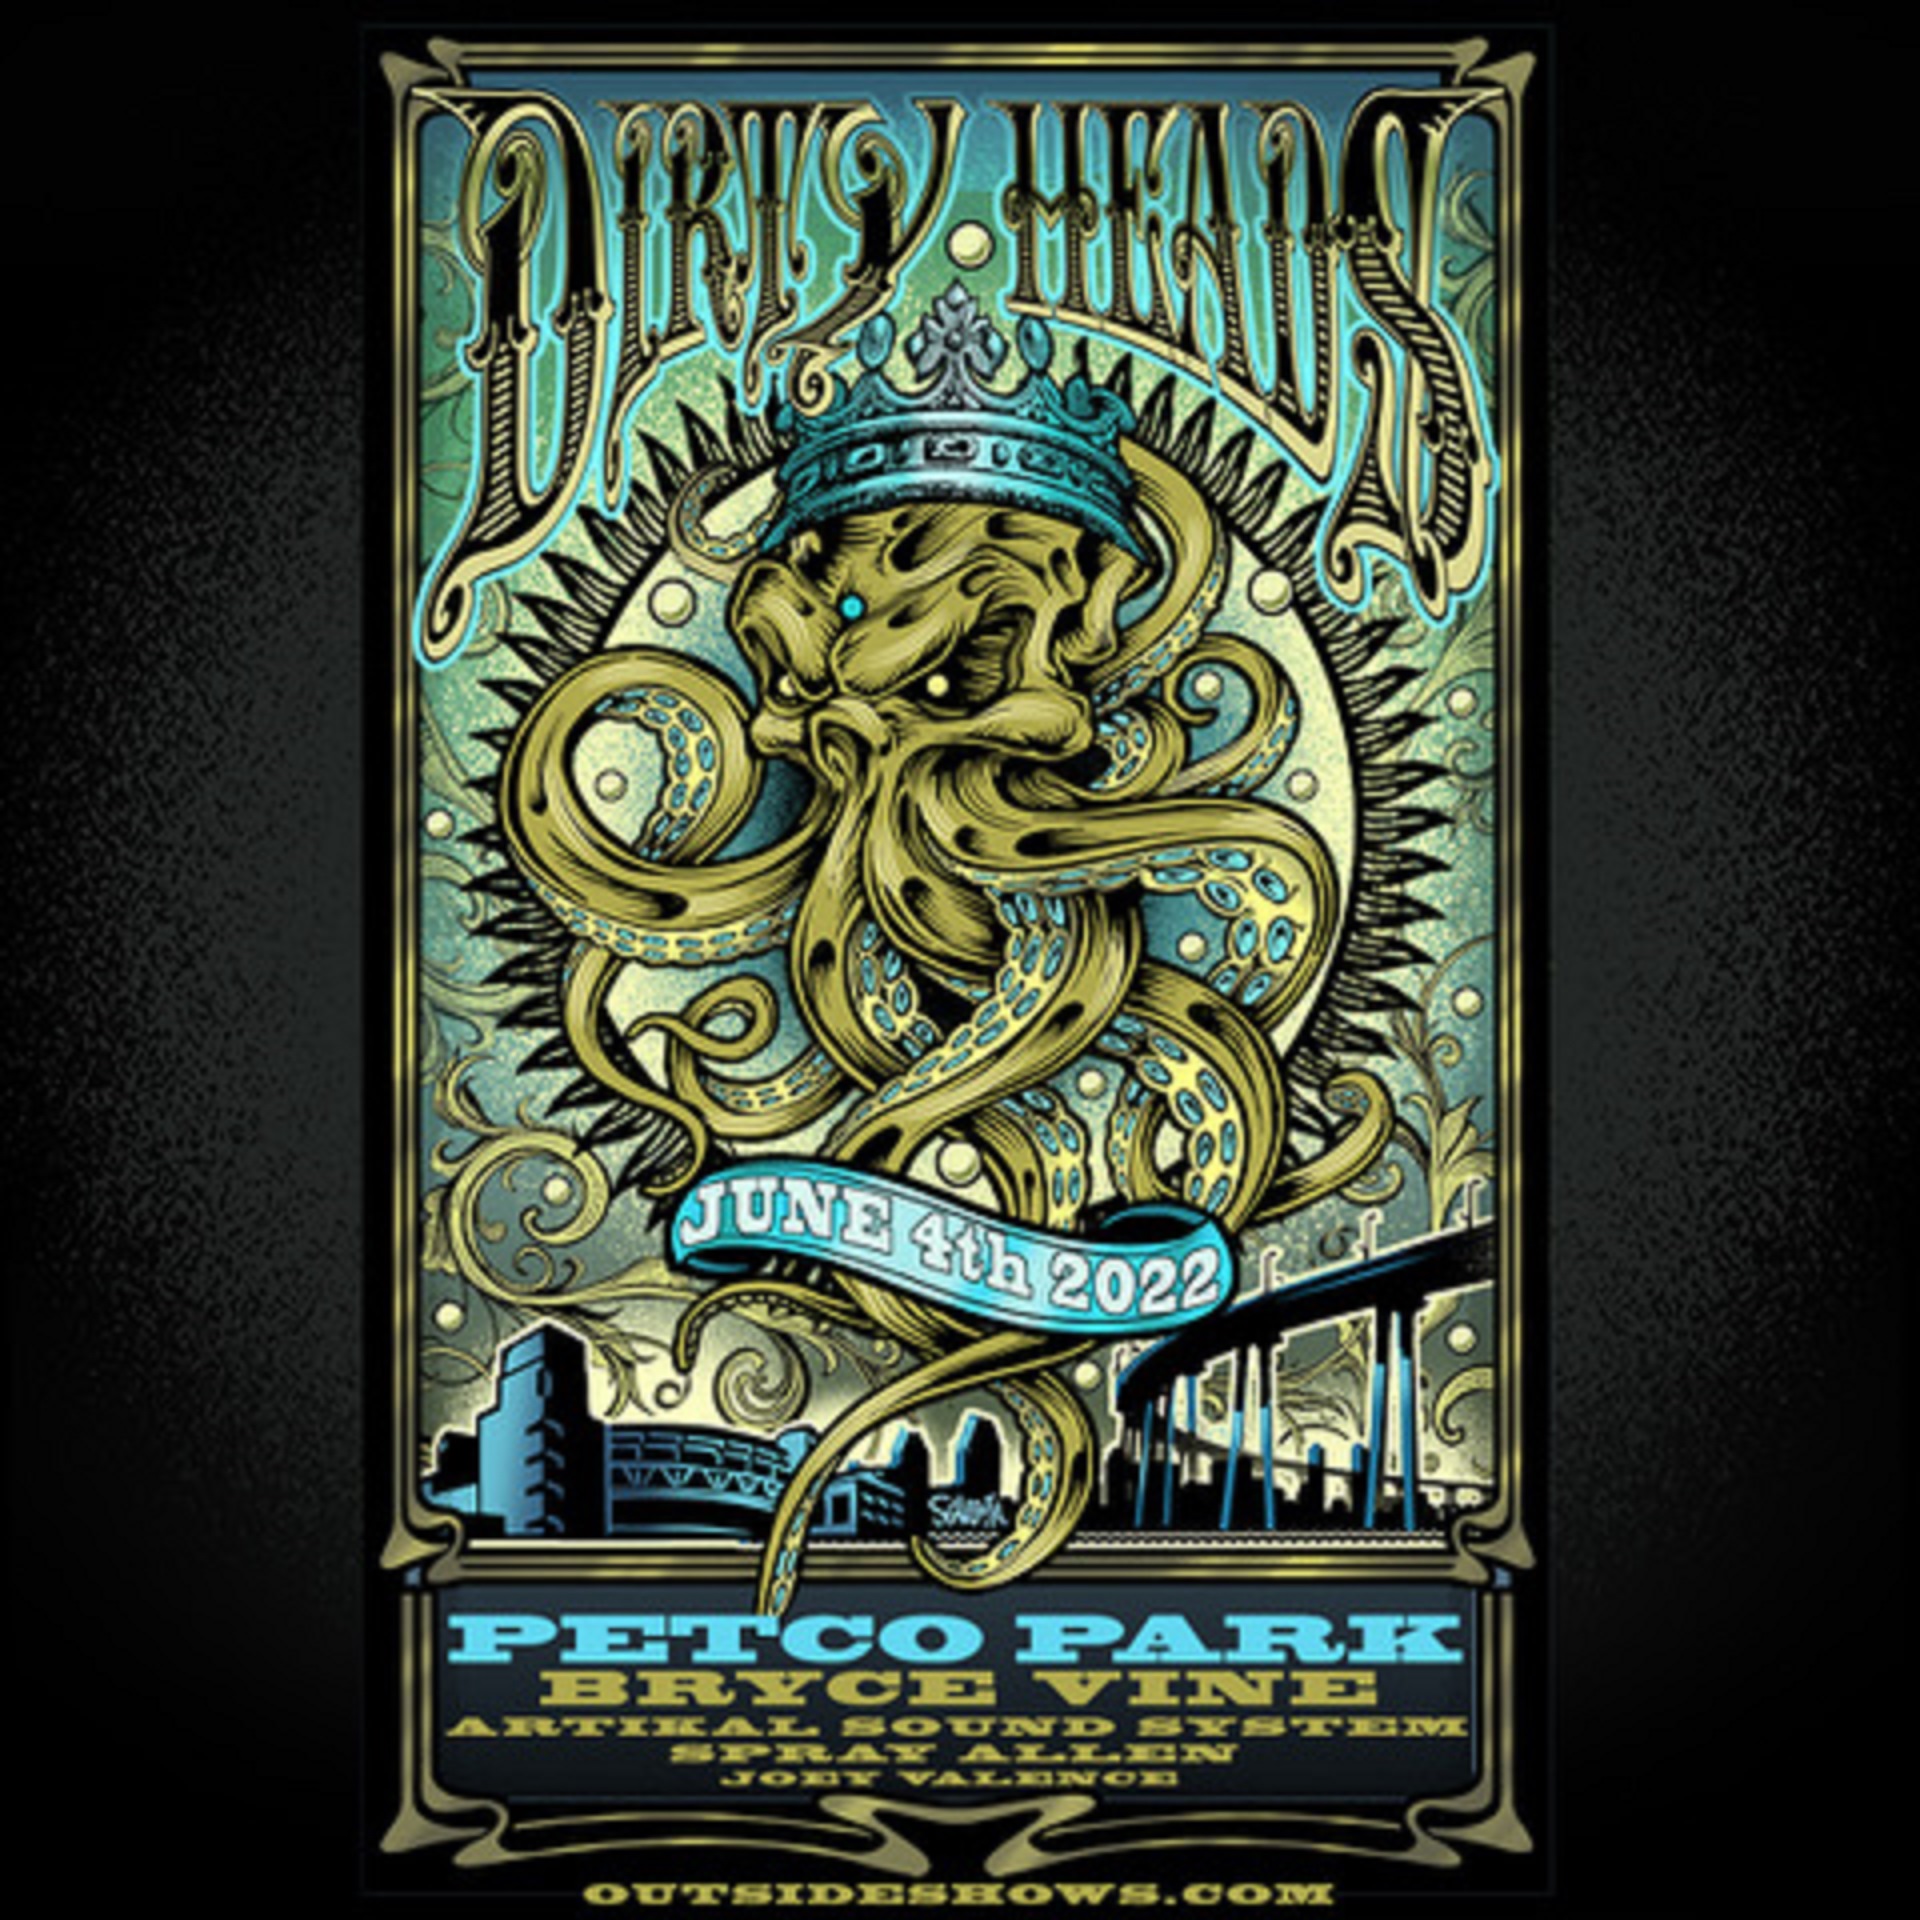 Dirty Heads @ San Diego's Petco Park Saturday June 4th, 2022